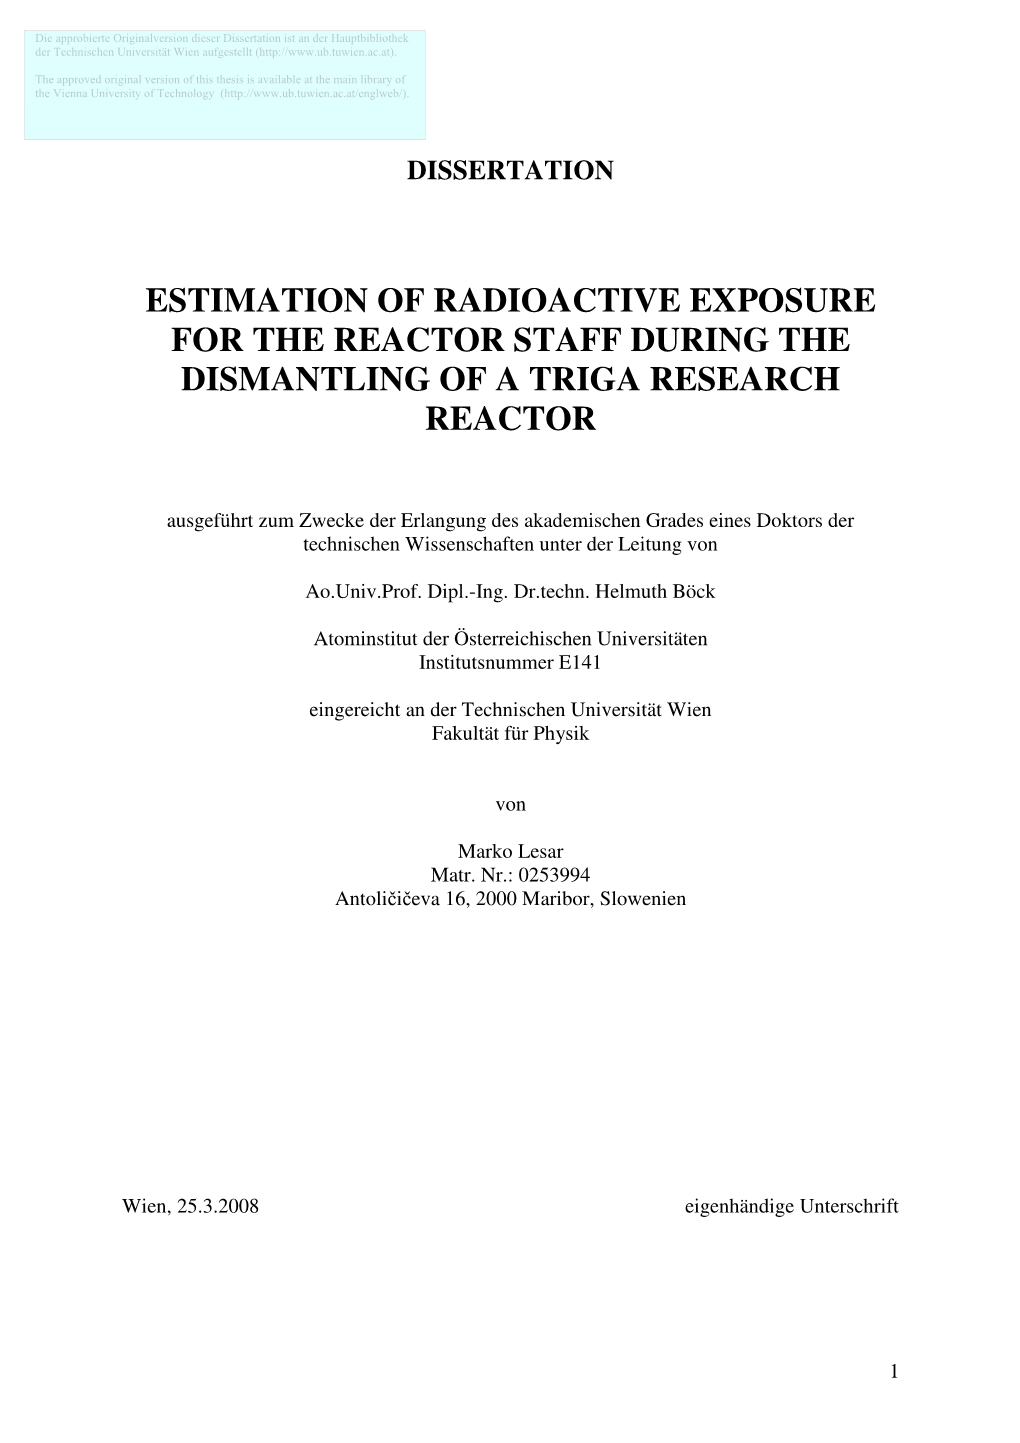 Estimation of Radioactive Exposure for the Reactor Staff During the Dismantling of a Triga Research Reactor